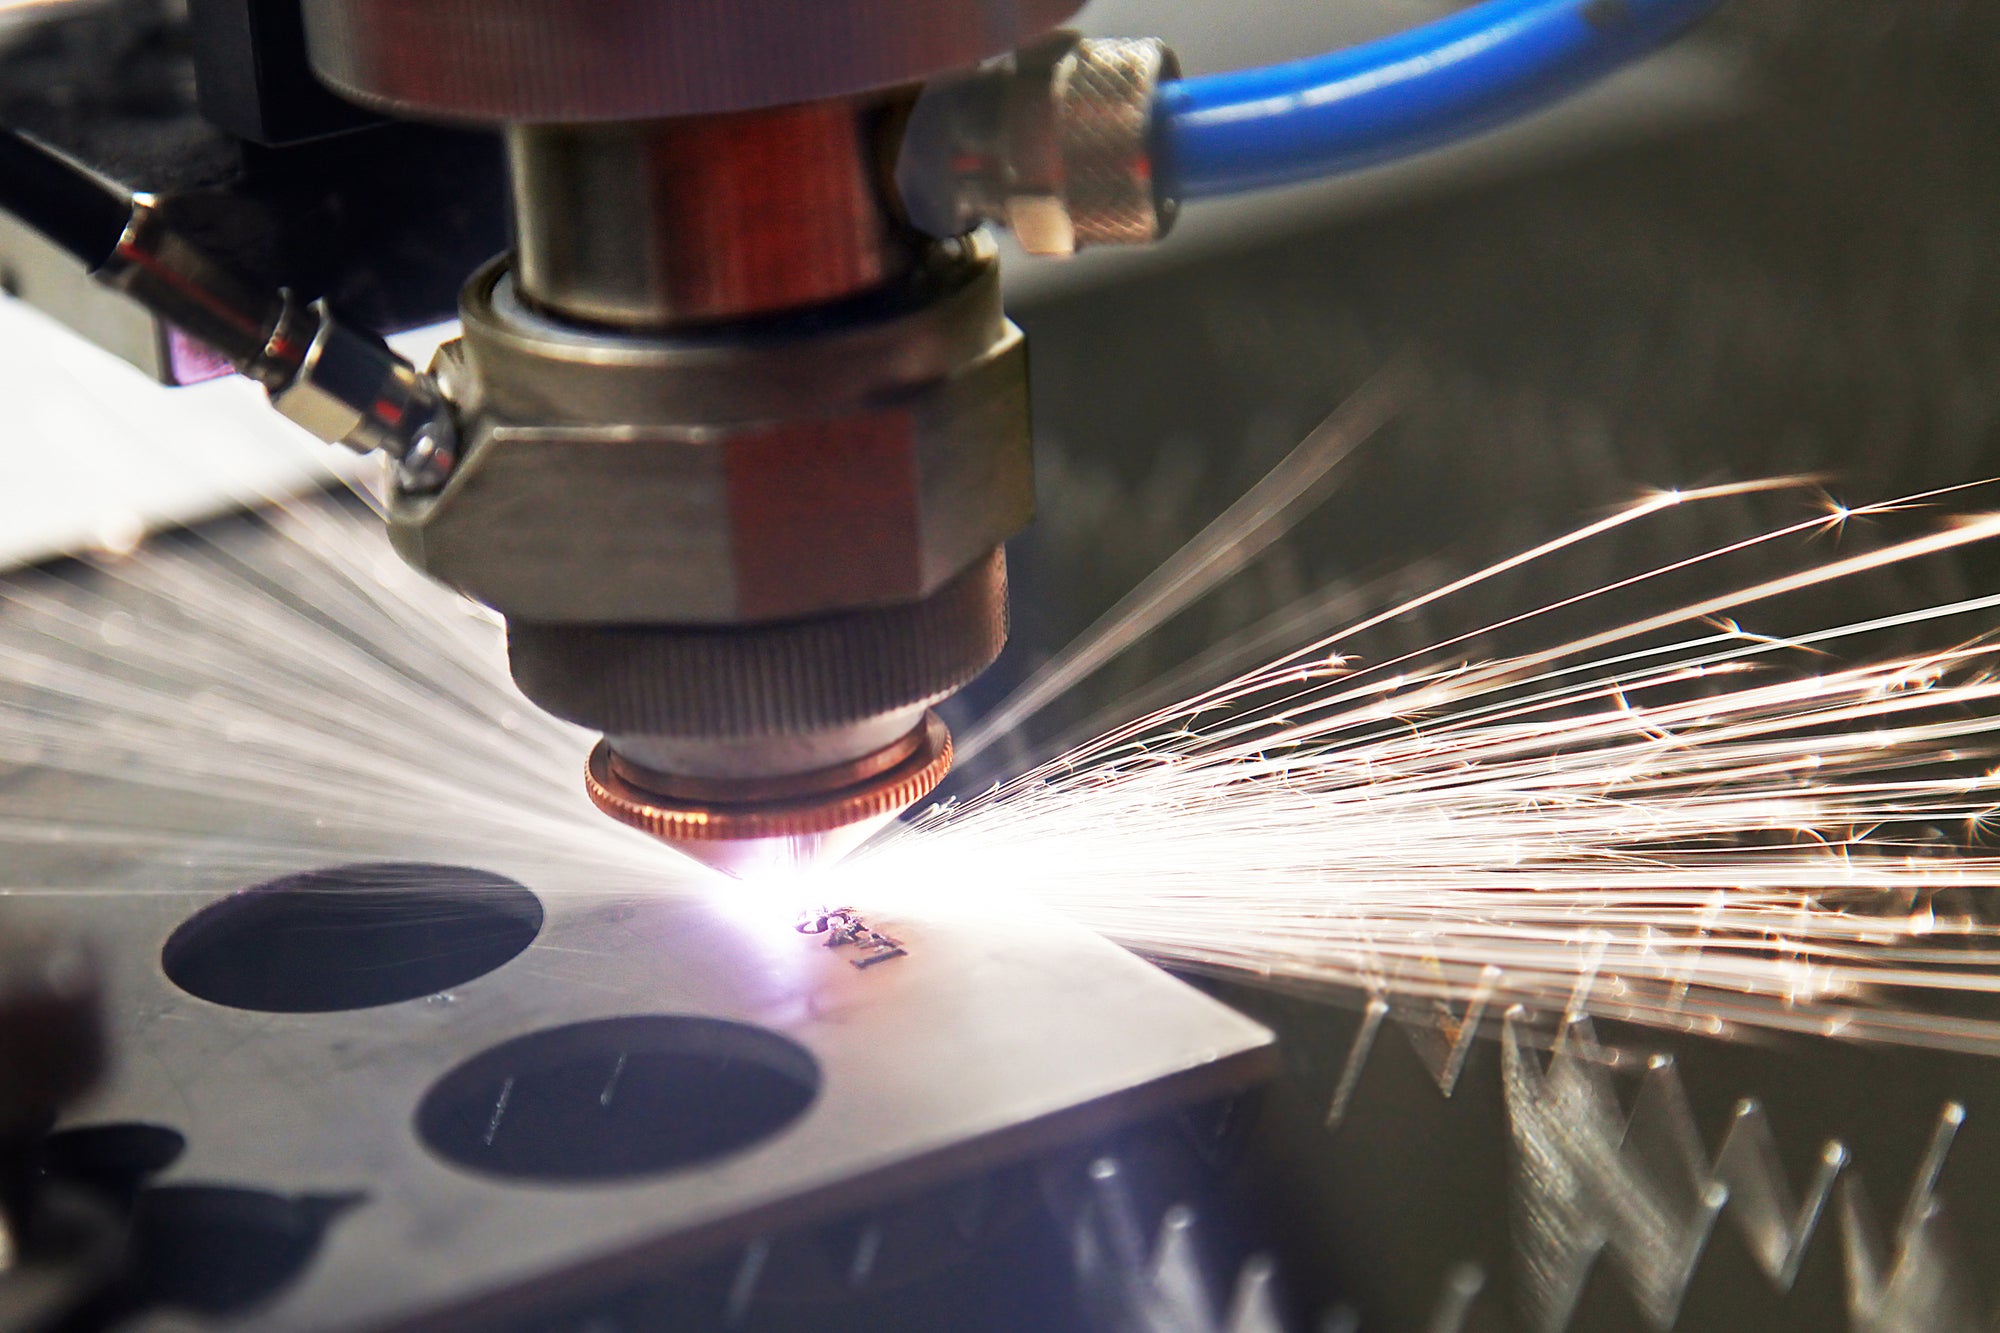 Which materials are best for laser cutting